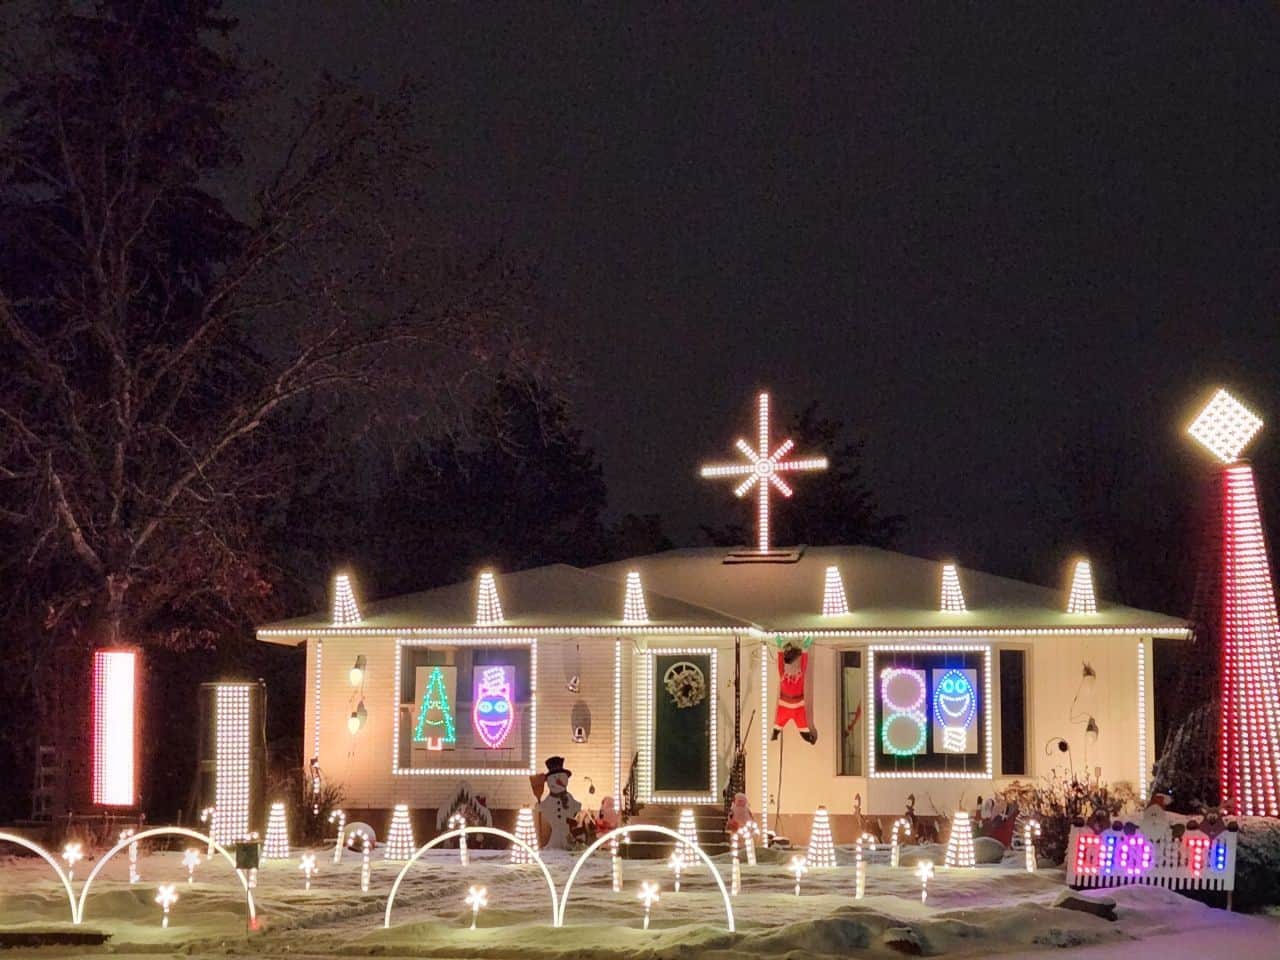 One resident in Brooks, Alberta, Canada puts on an amazing light show. With dancing lights, music and all the dazzling features of a grest Christmas display.